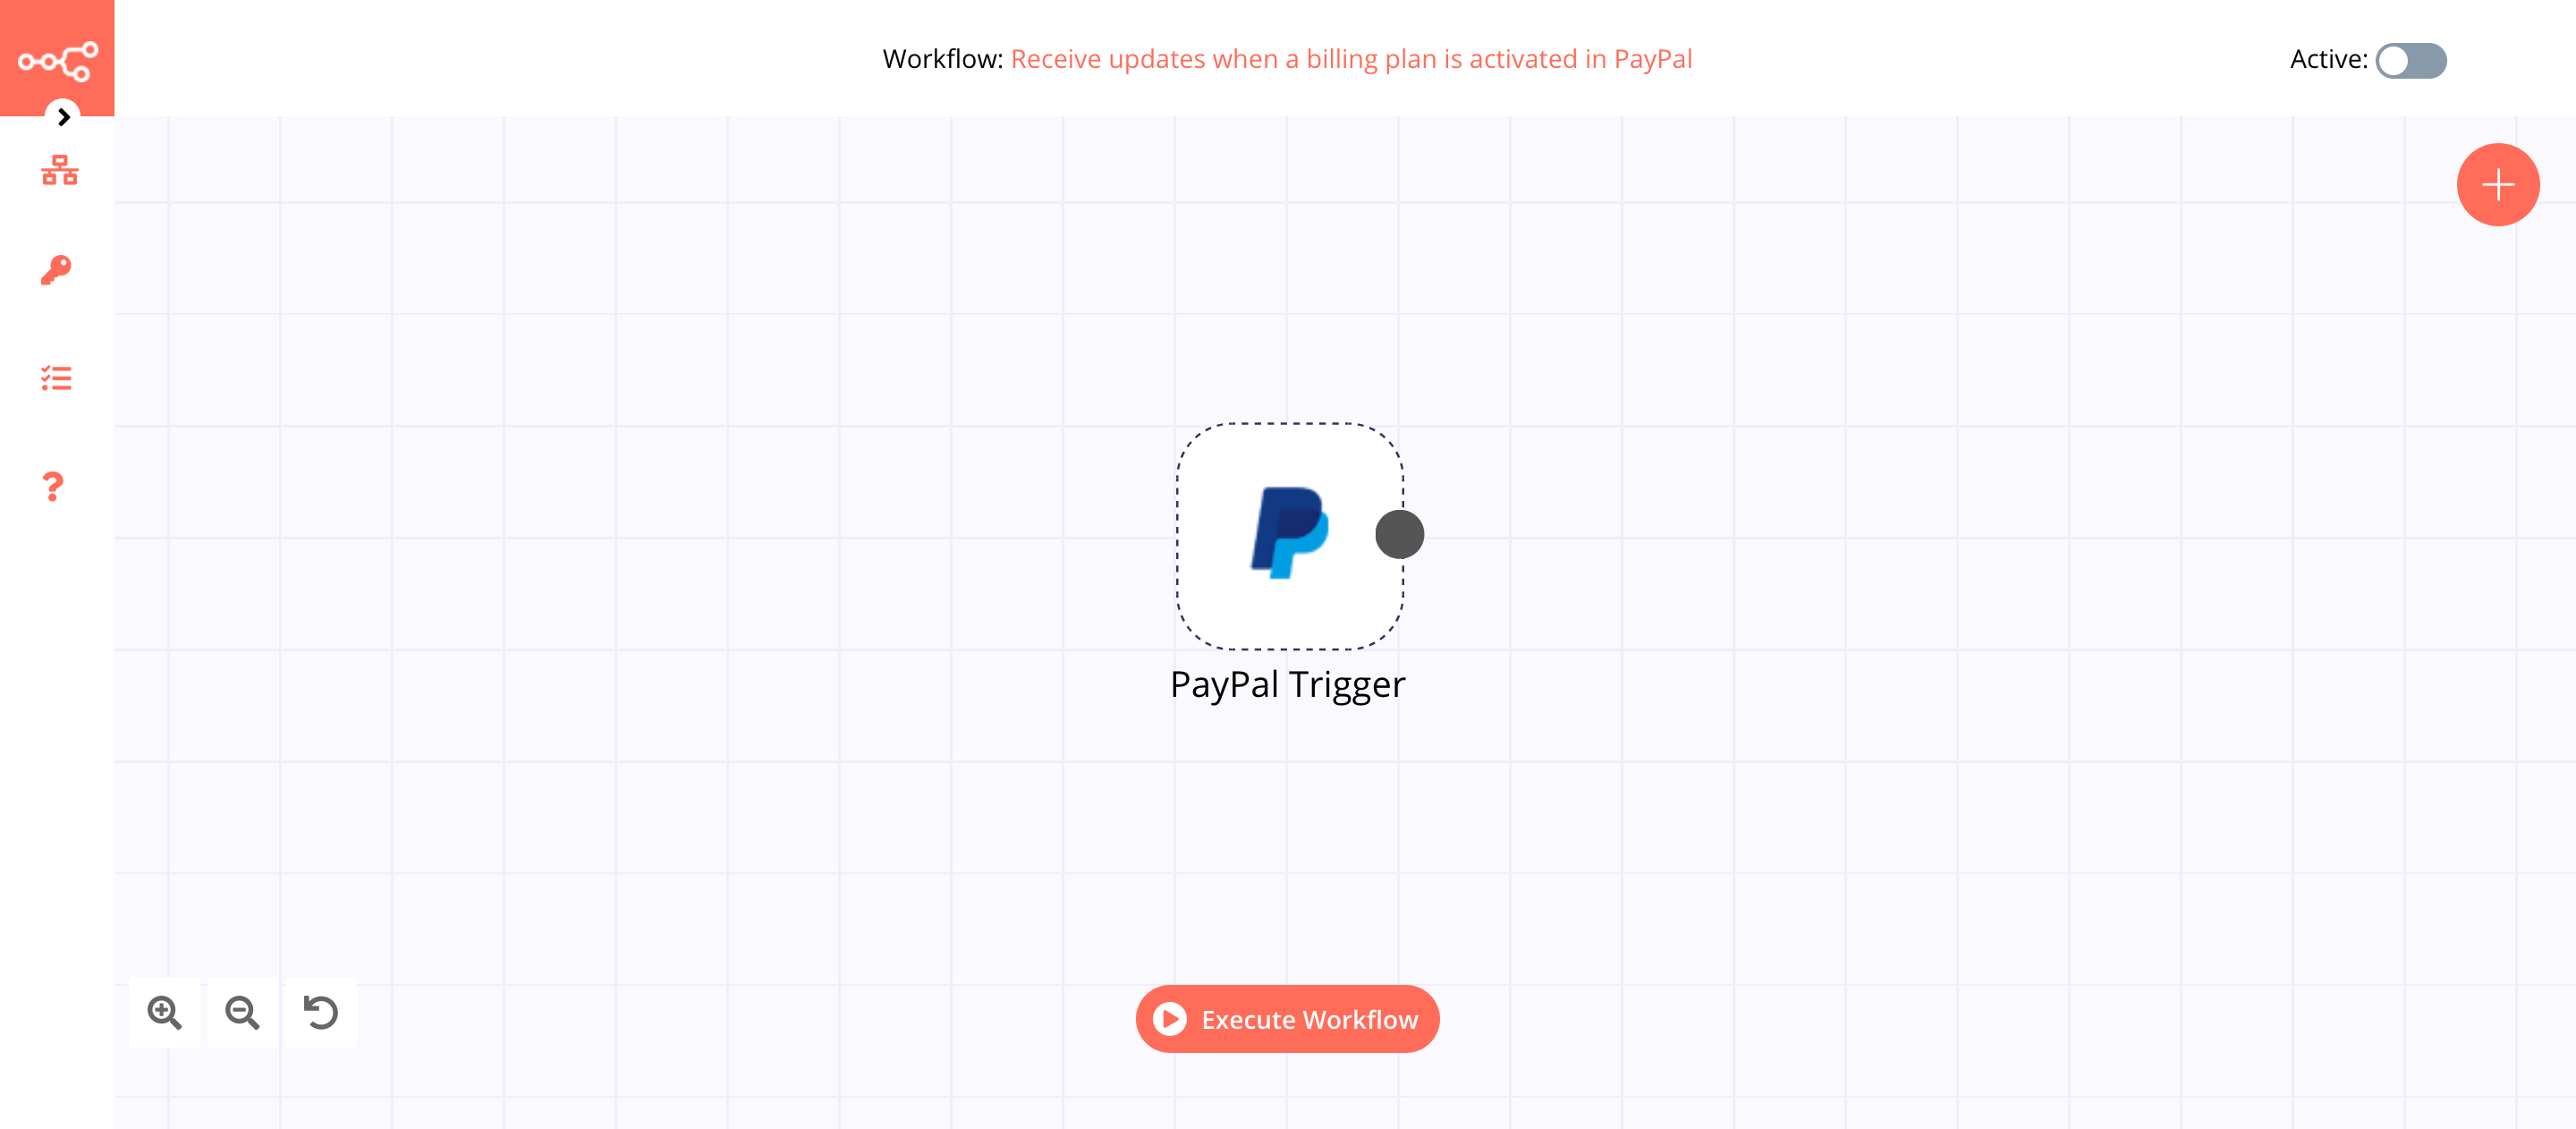 A workflow with the PayPal Trigger node